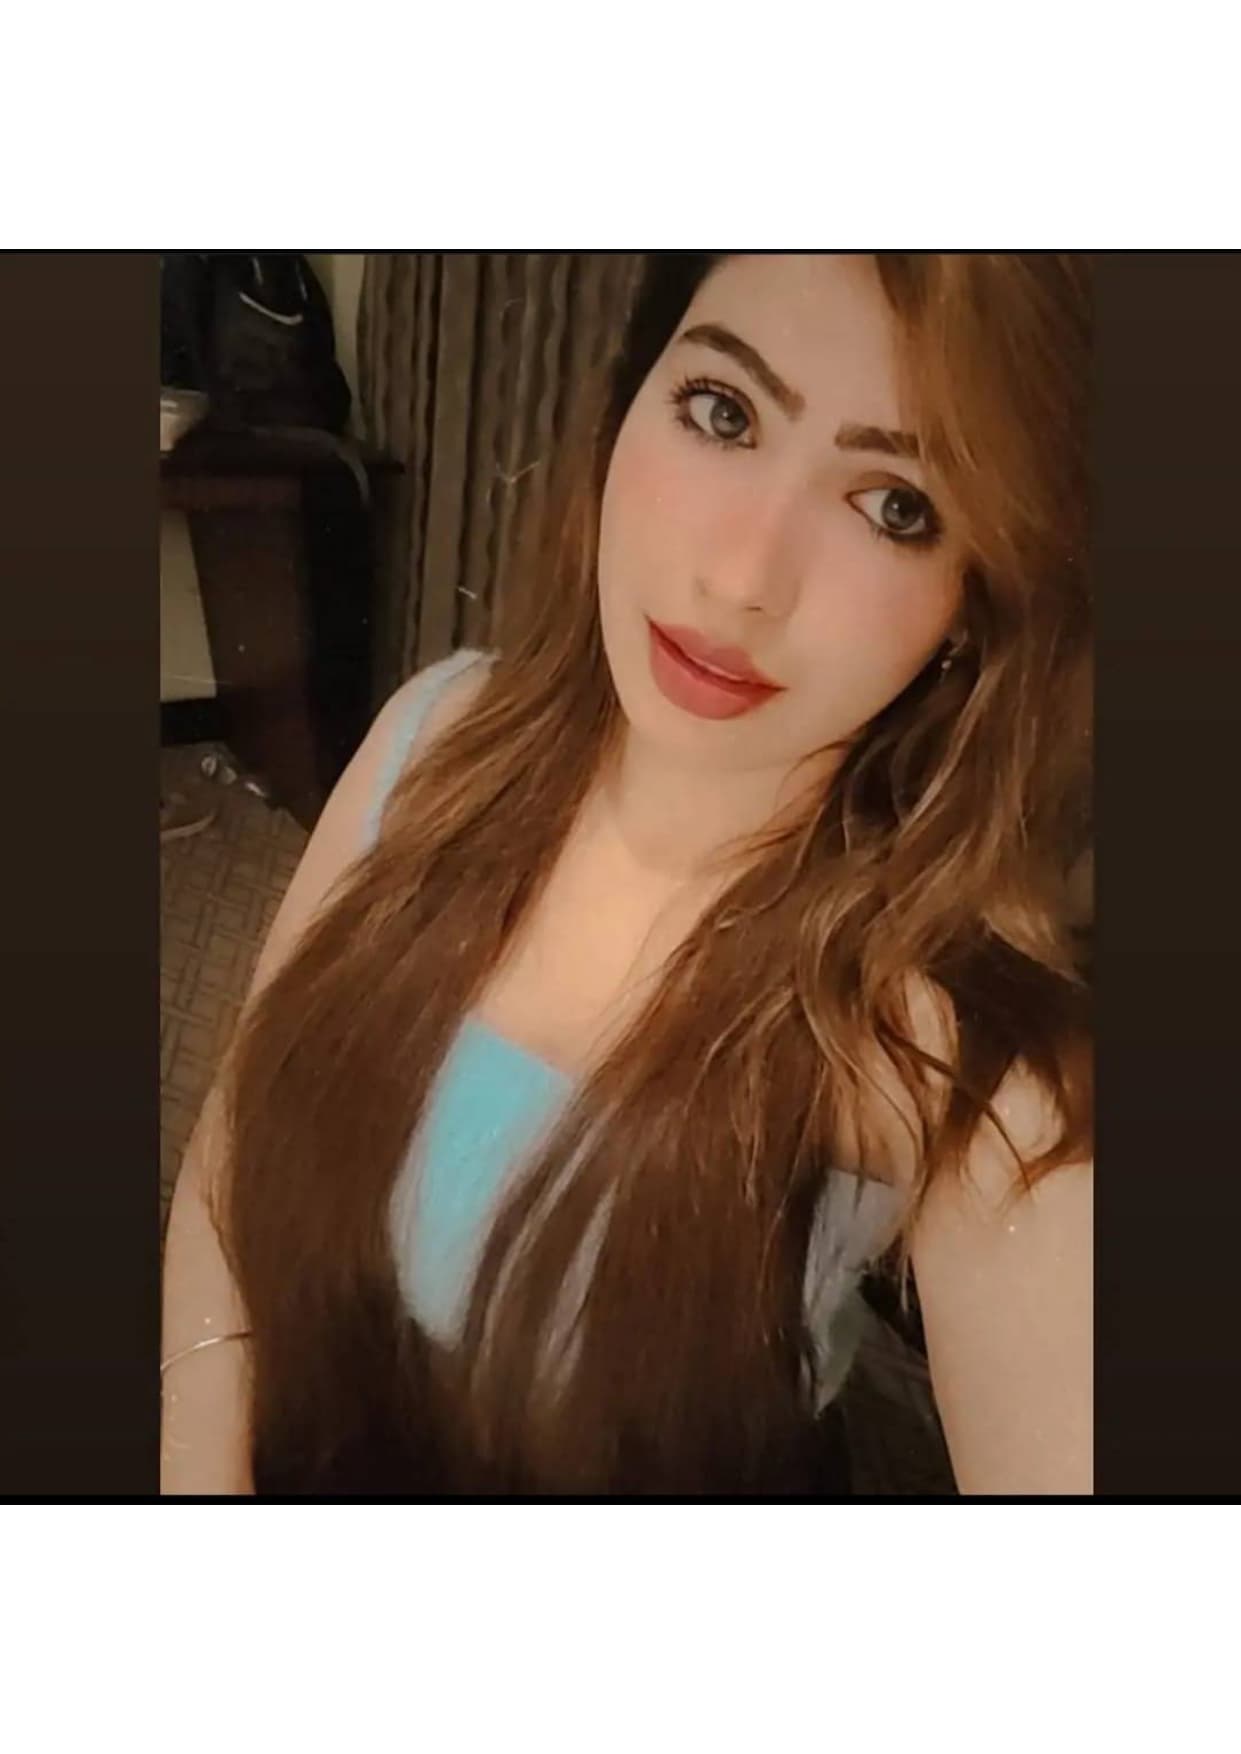 VIP call girls in Agra cash payment no advance Booking